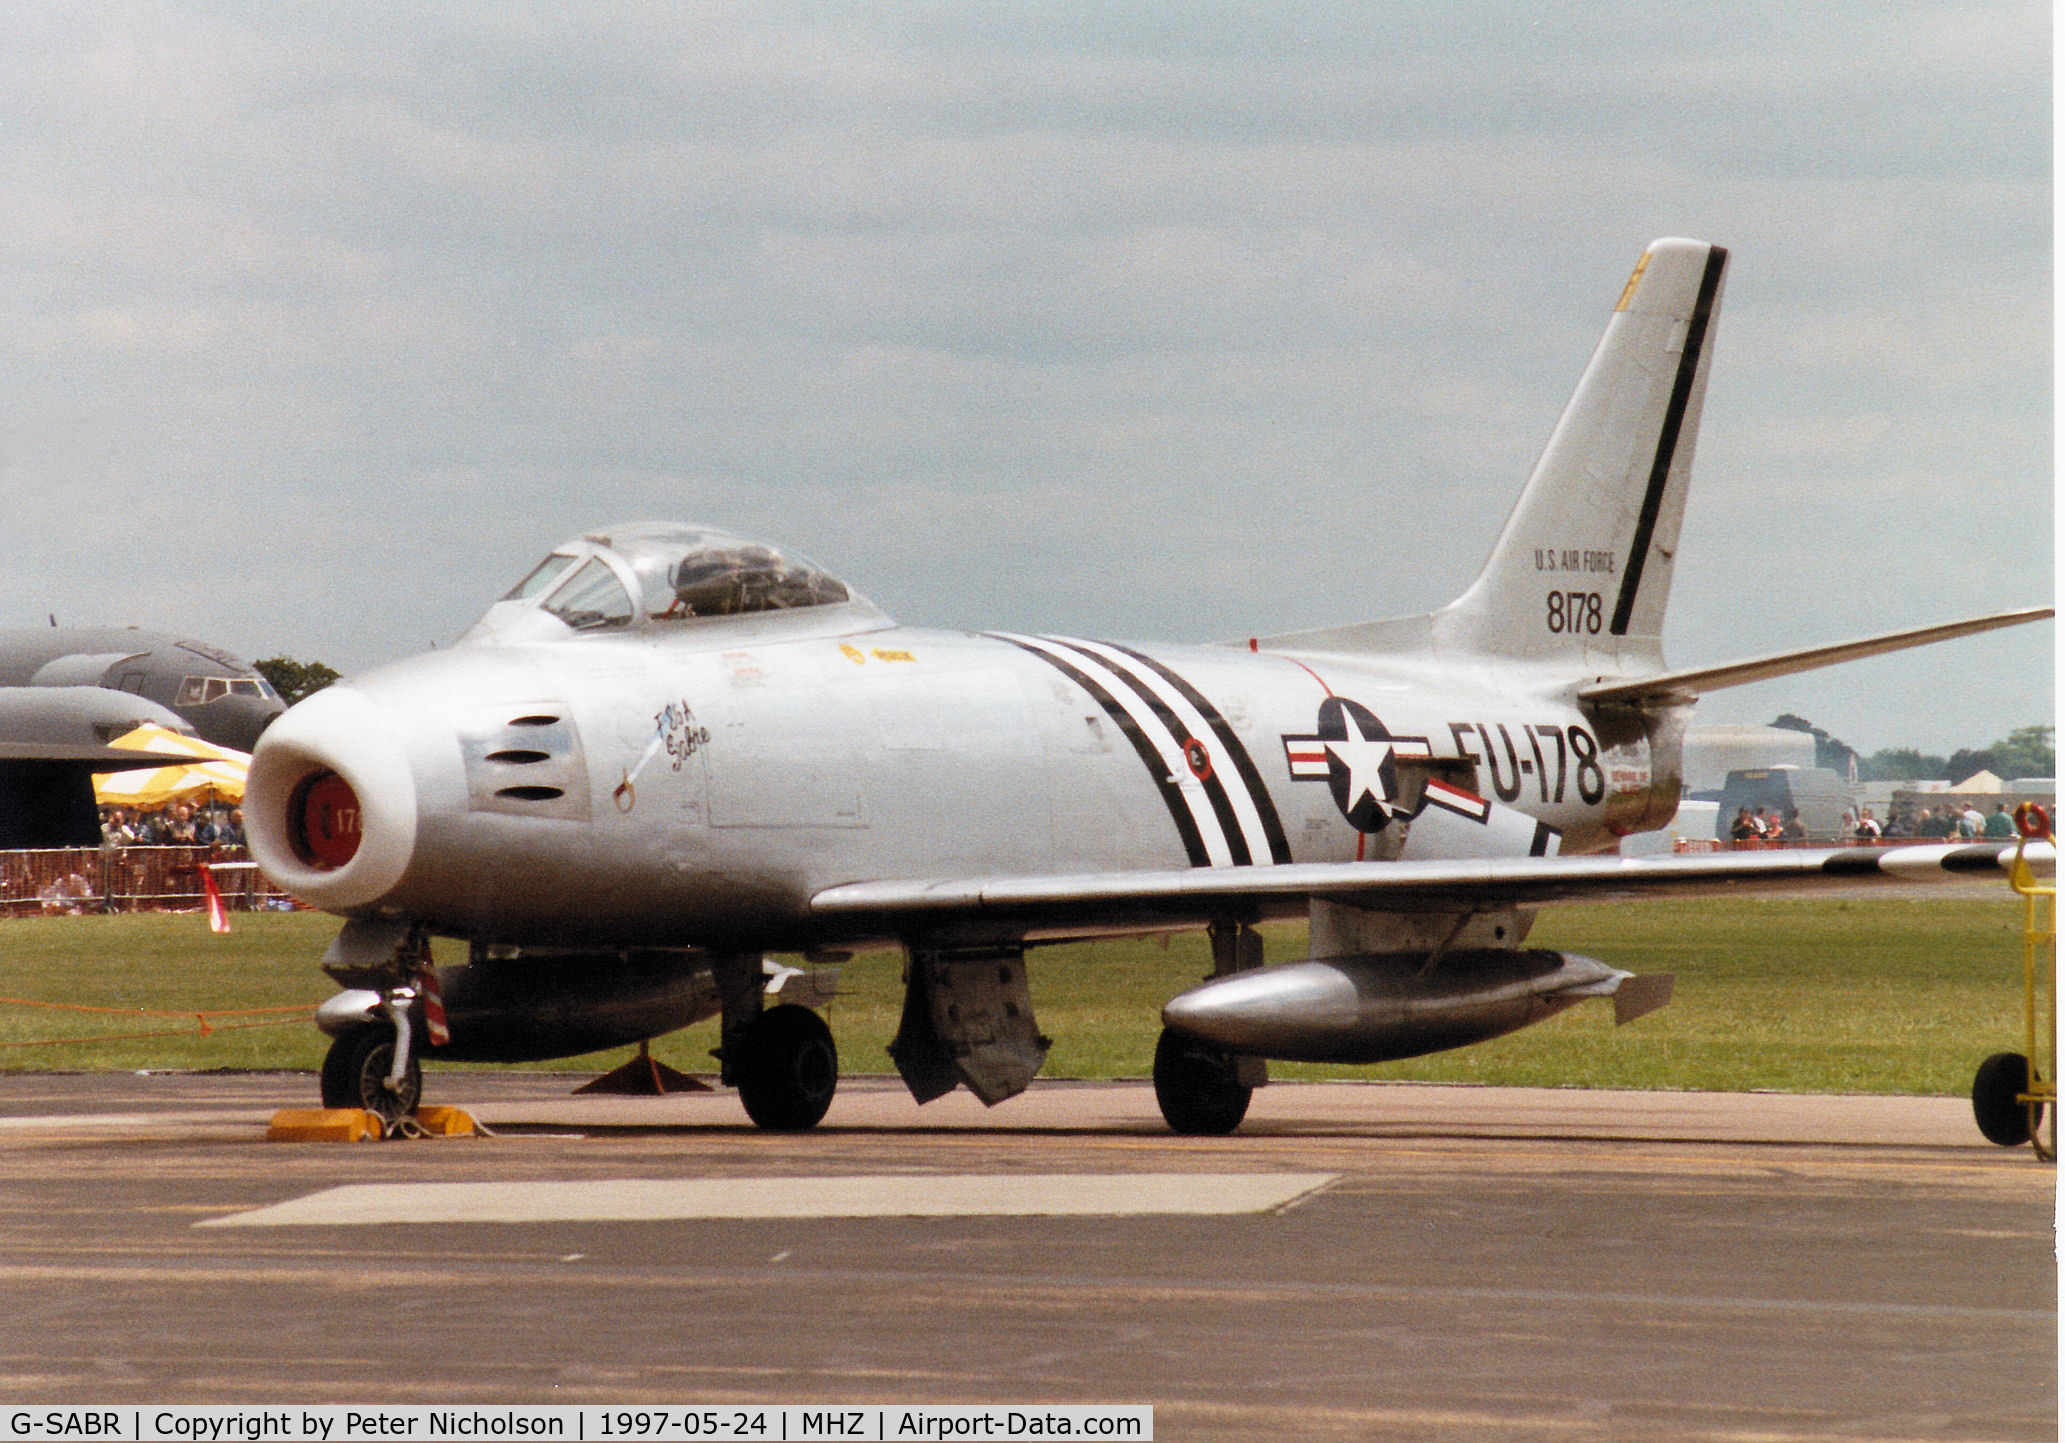 G-SABR, 1948 North American F-86A Sabre C/N 151-083 (151-43547), F-86A Sabre 48-0178 on the flight-line at the 1997 RAF Mildenhall Air Fete.